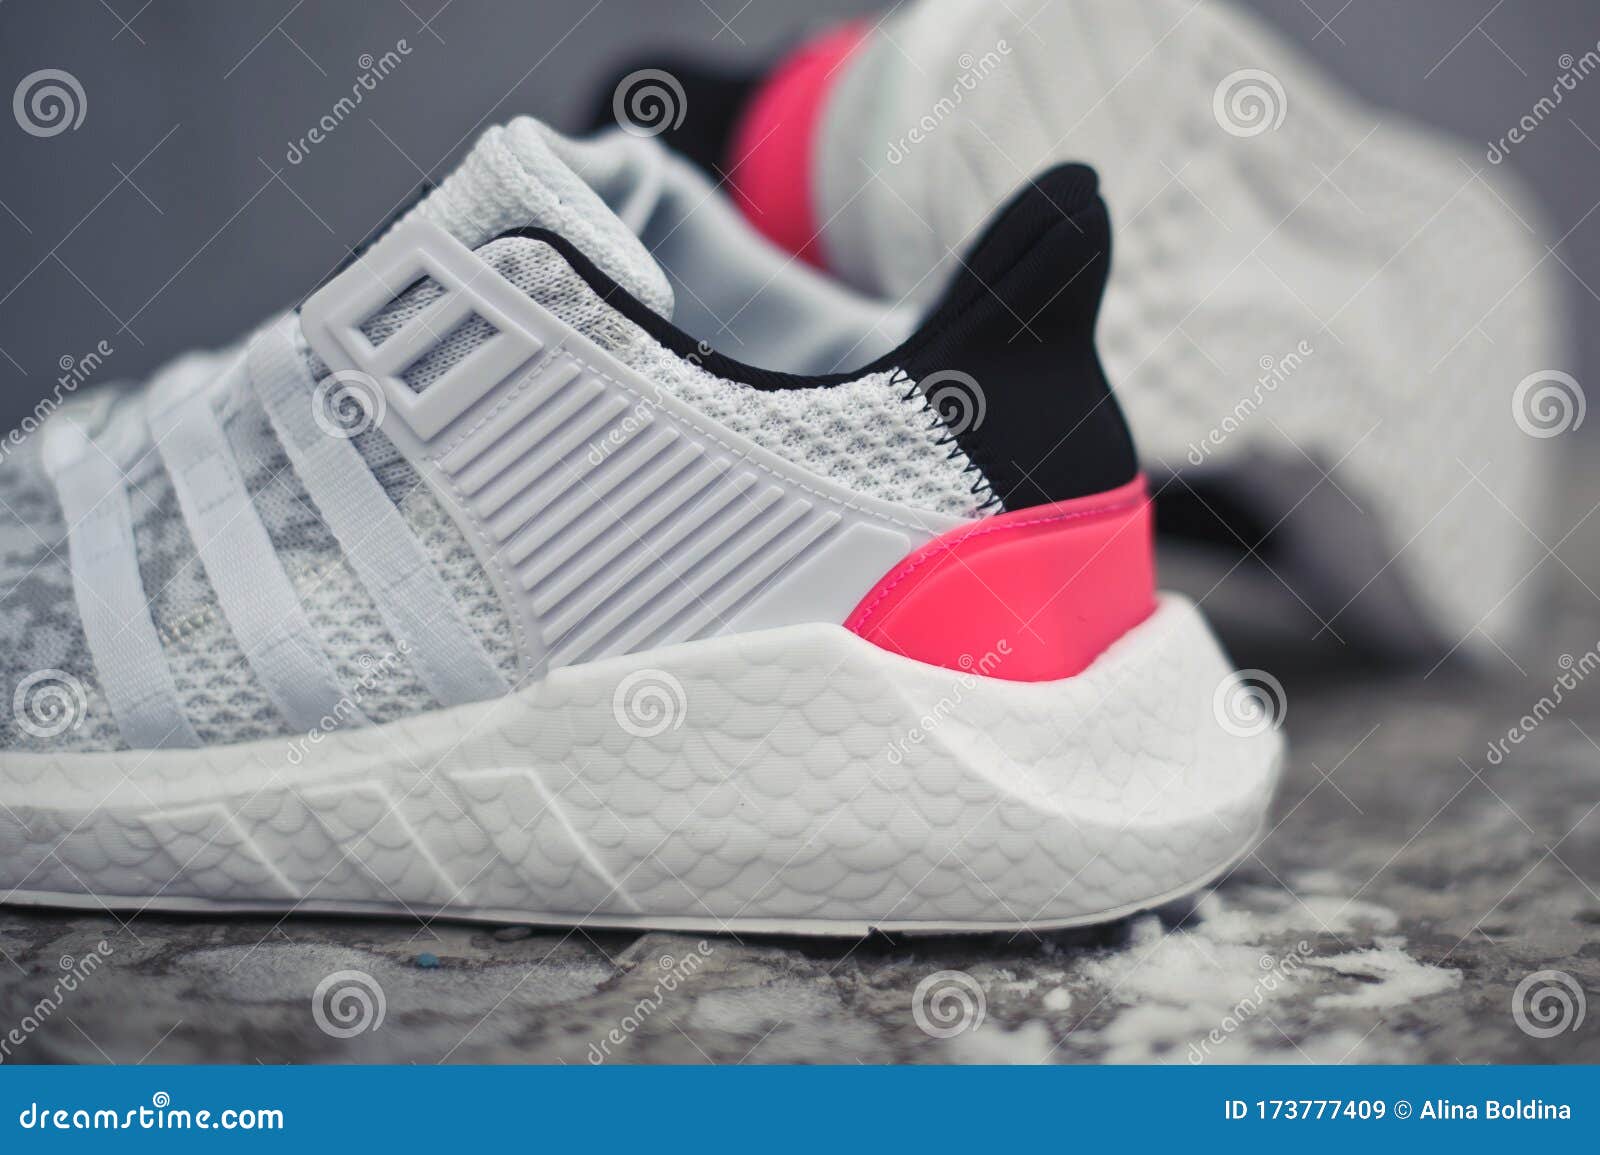 adidas sports eqt support running shoes